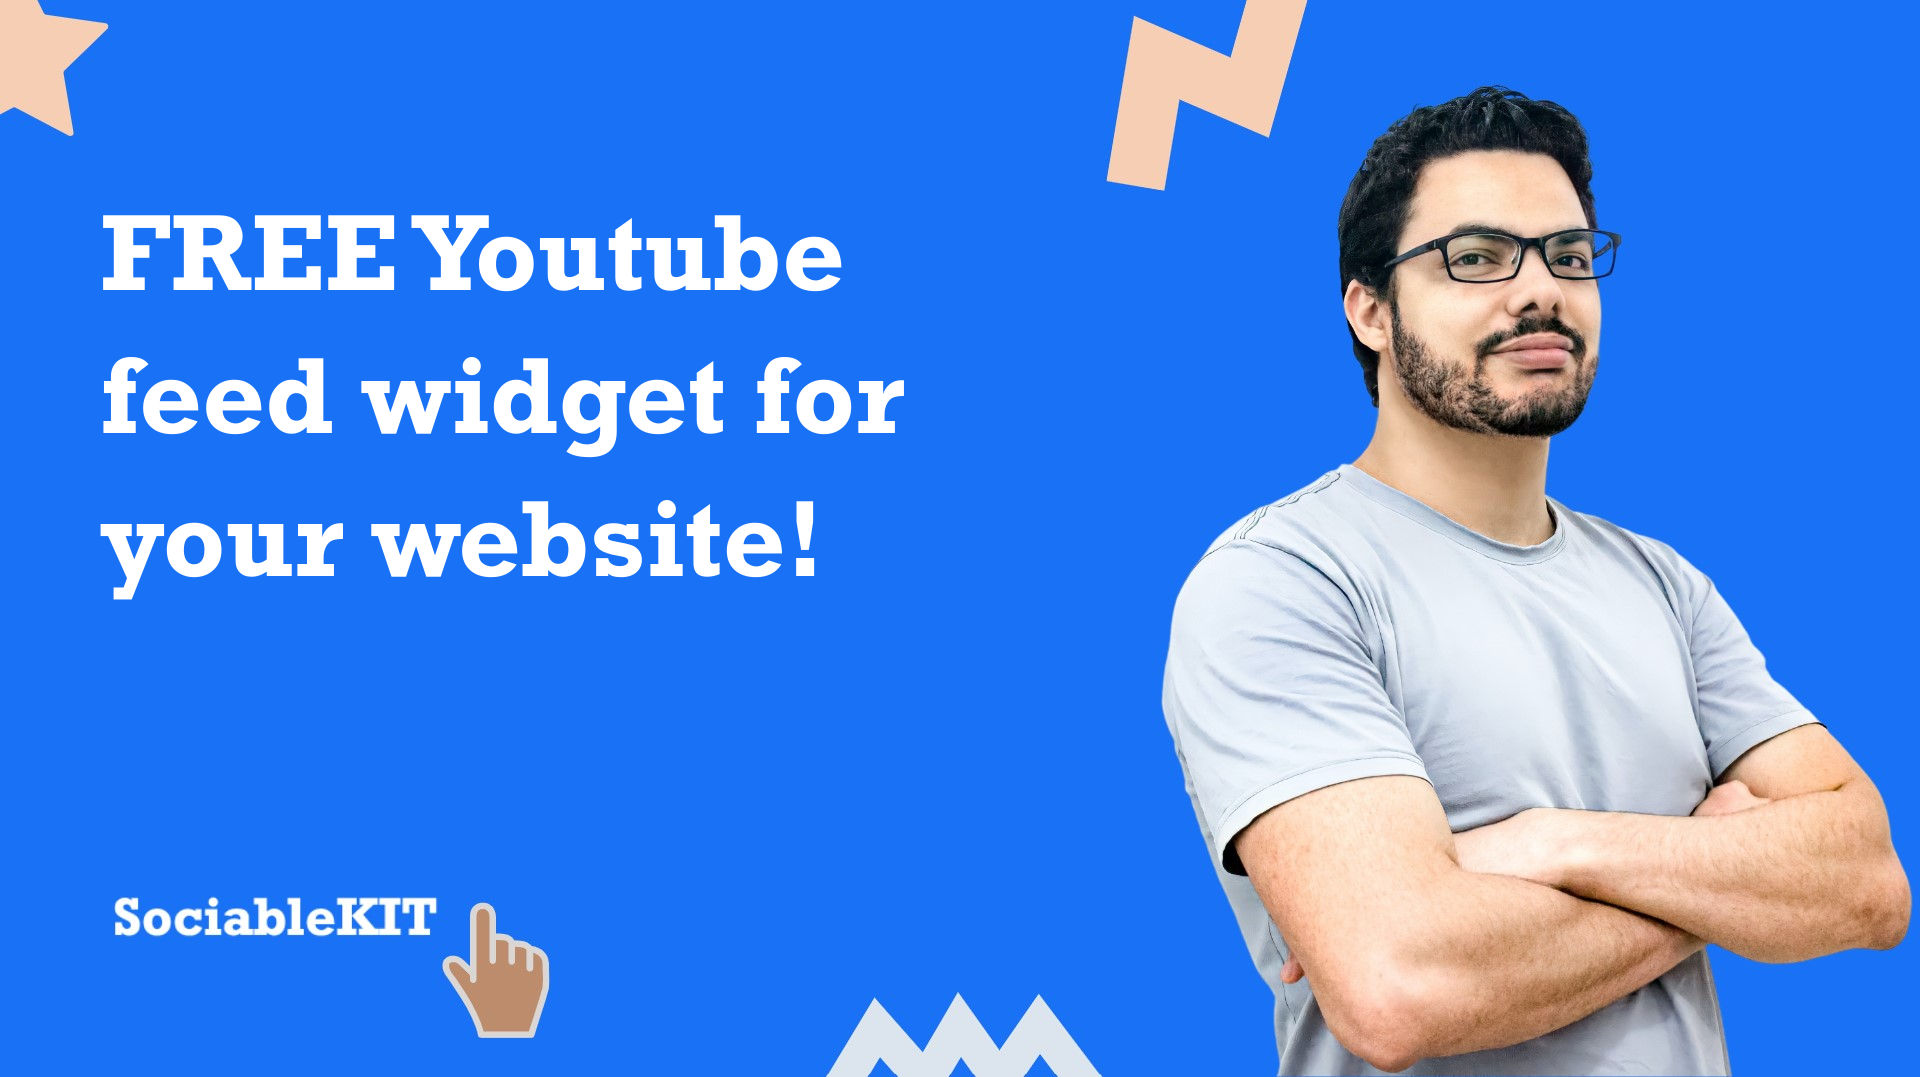 Free Youtube feed widget for your website